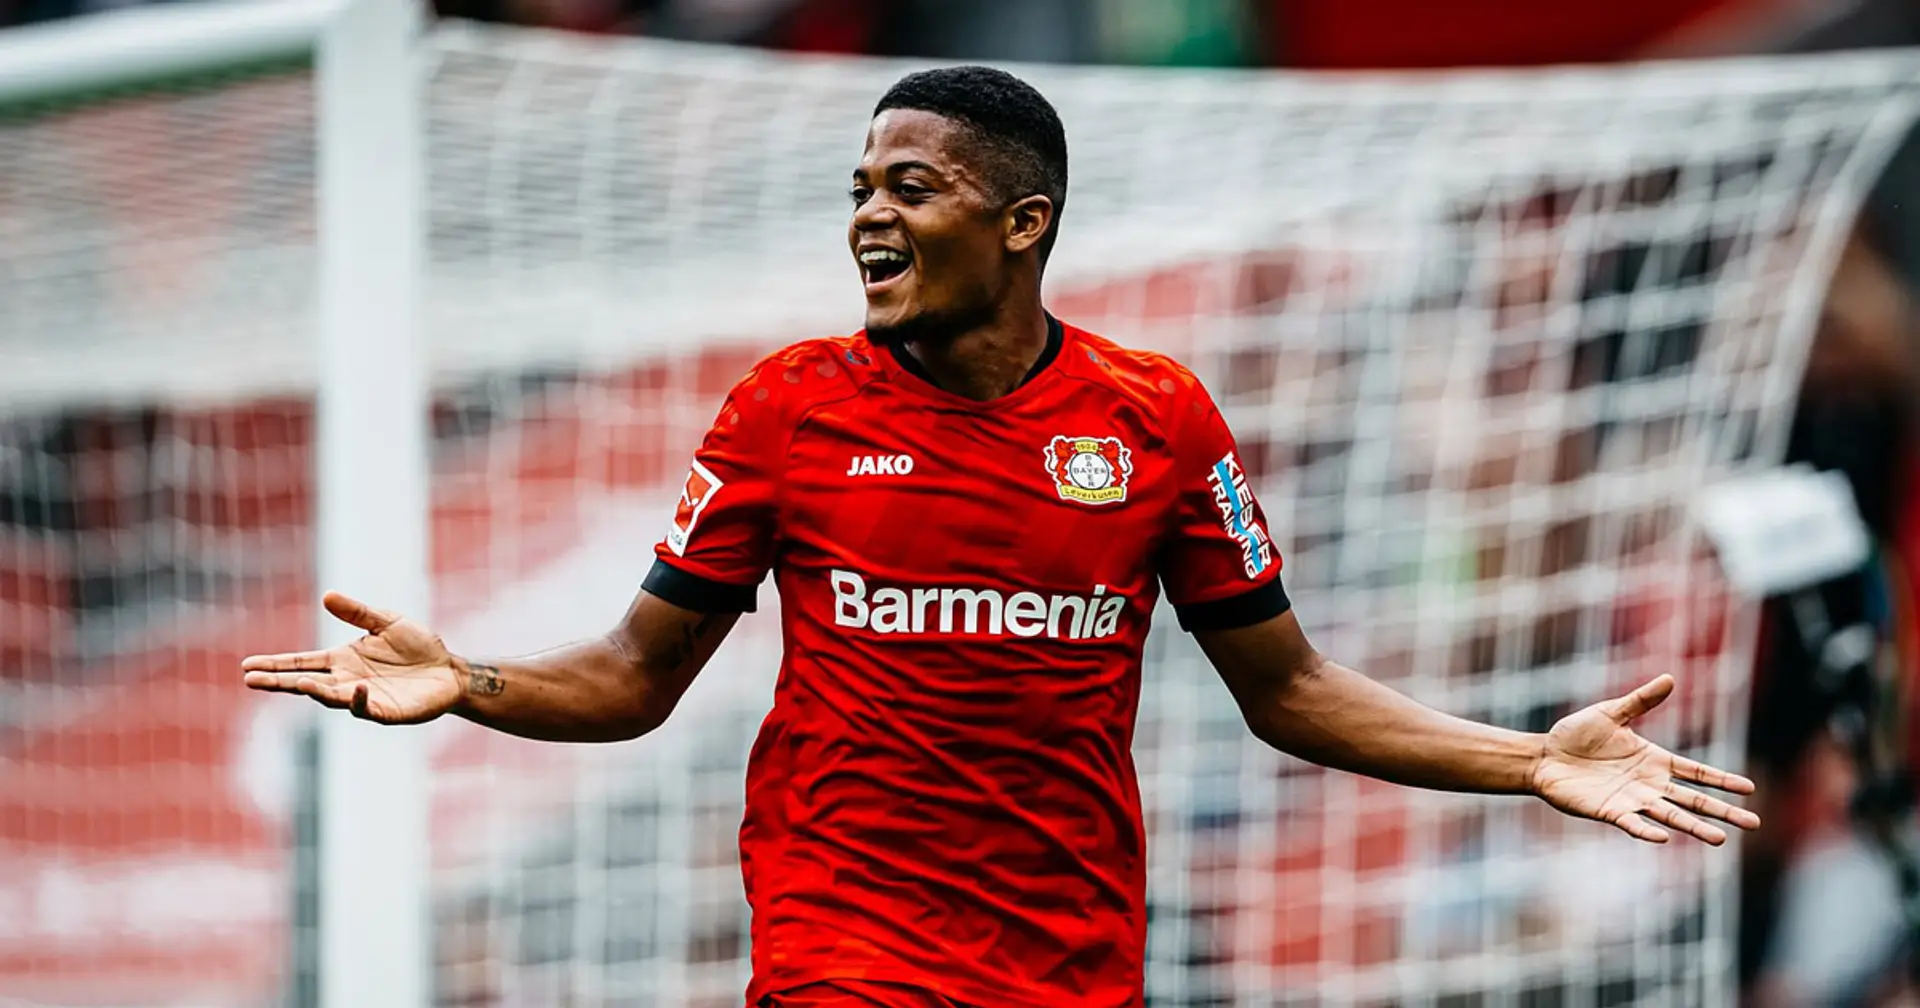 Chelsea 'ready to accelerate their interest' in Leon Bailey after his outstanding performance vs Cologne